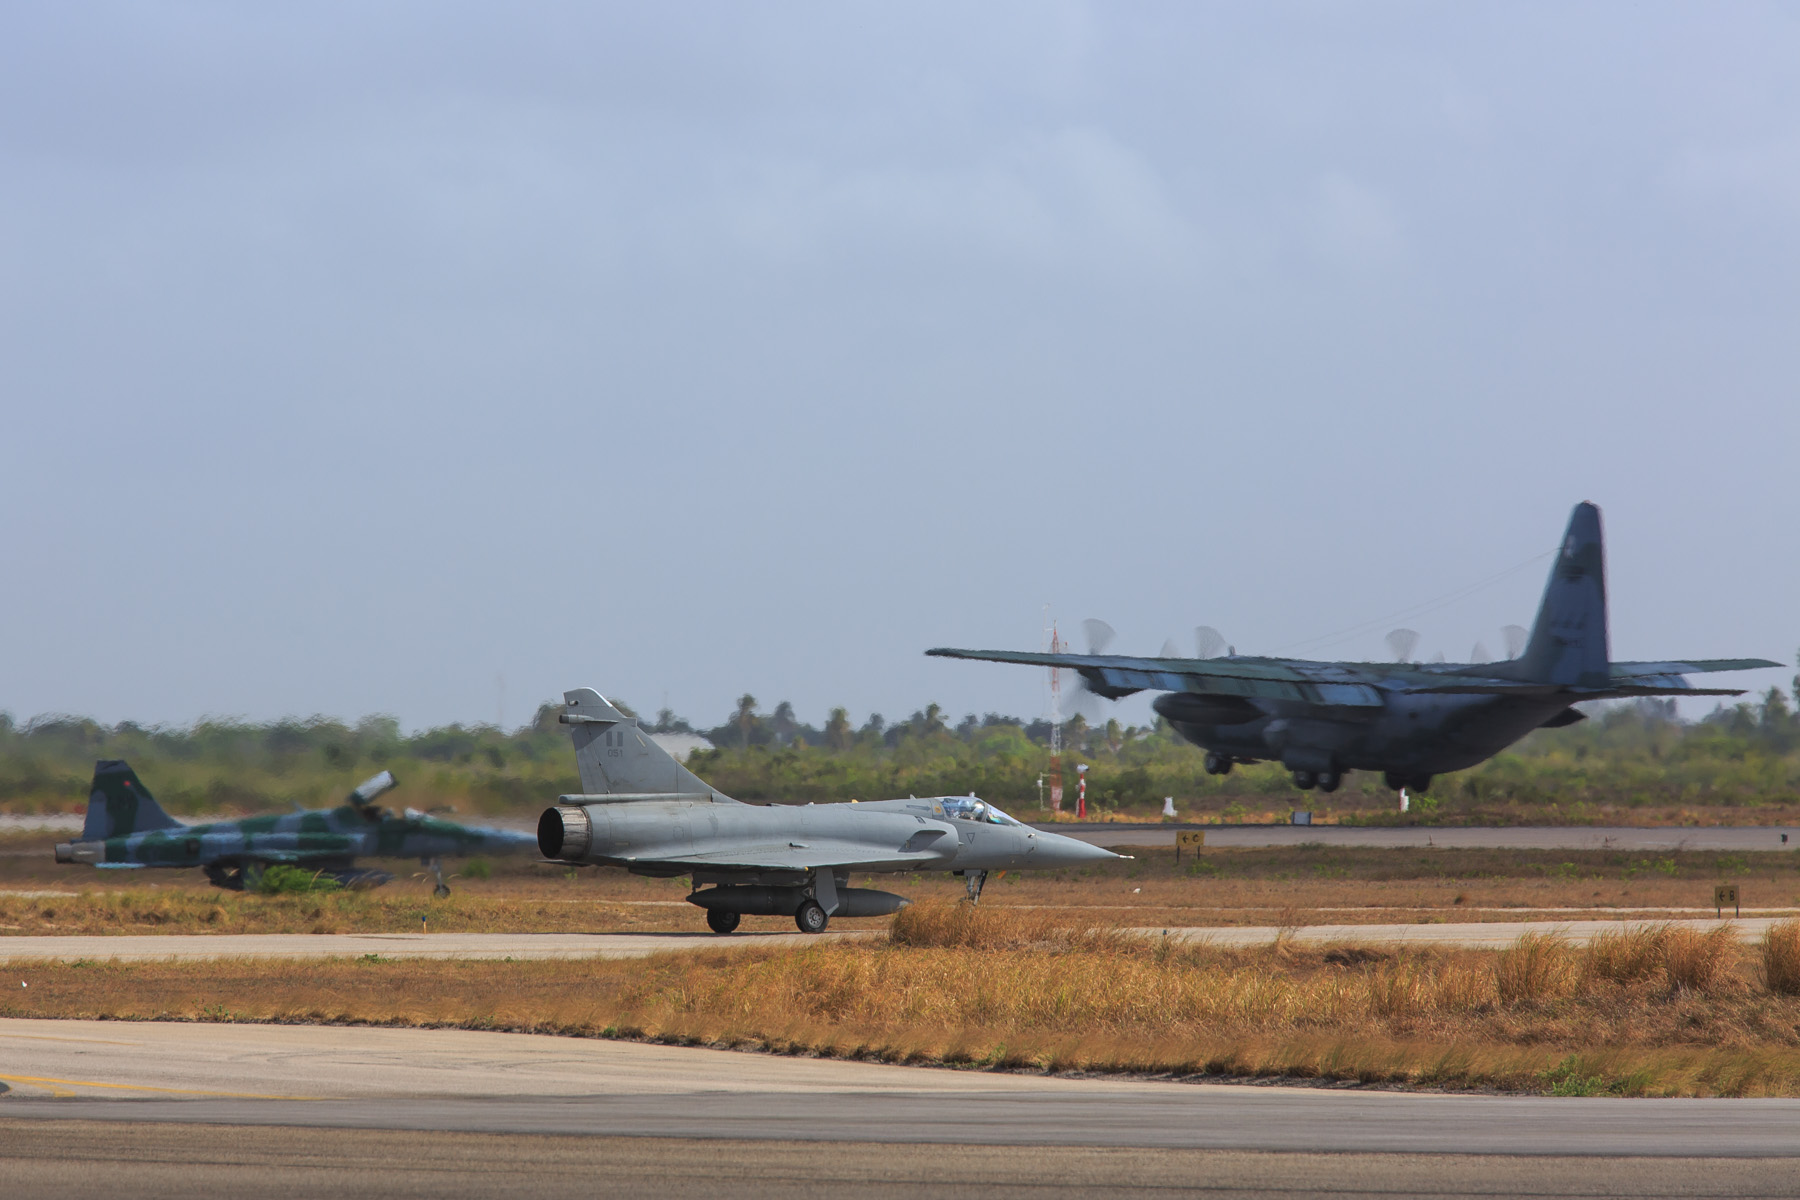 First Composite Air Operation in the exercise gathers 59 aircraft; see the video